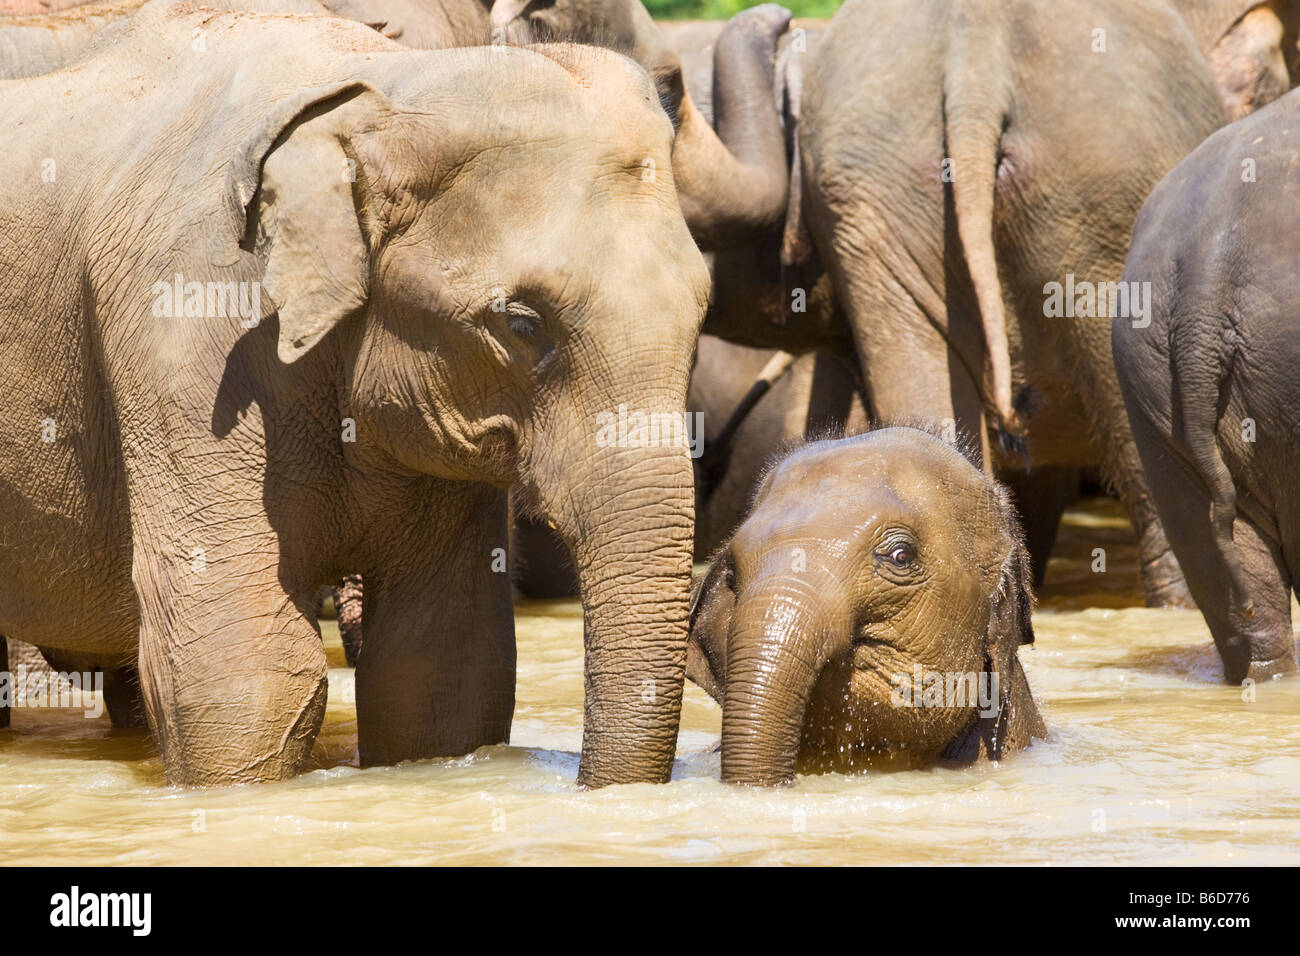 Young elephant calf amongst other elephants standing in a shallow river near The Pinnawela Elephant Orphanage in Sri Lanka Stock Photo